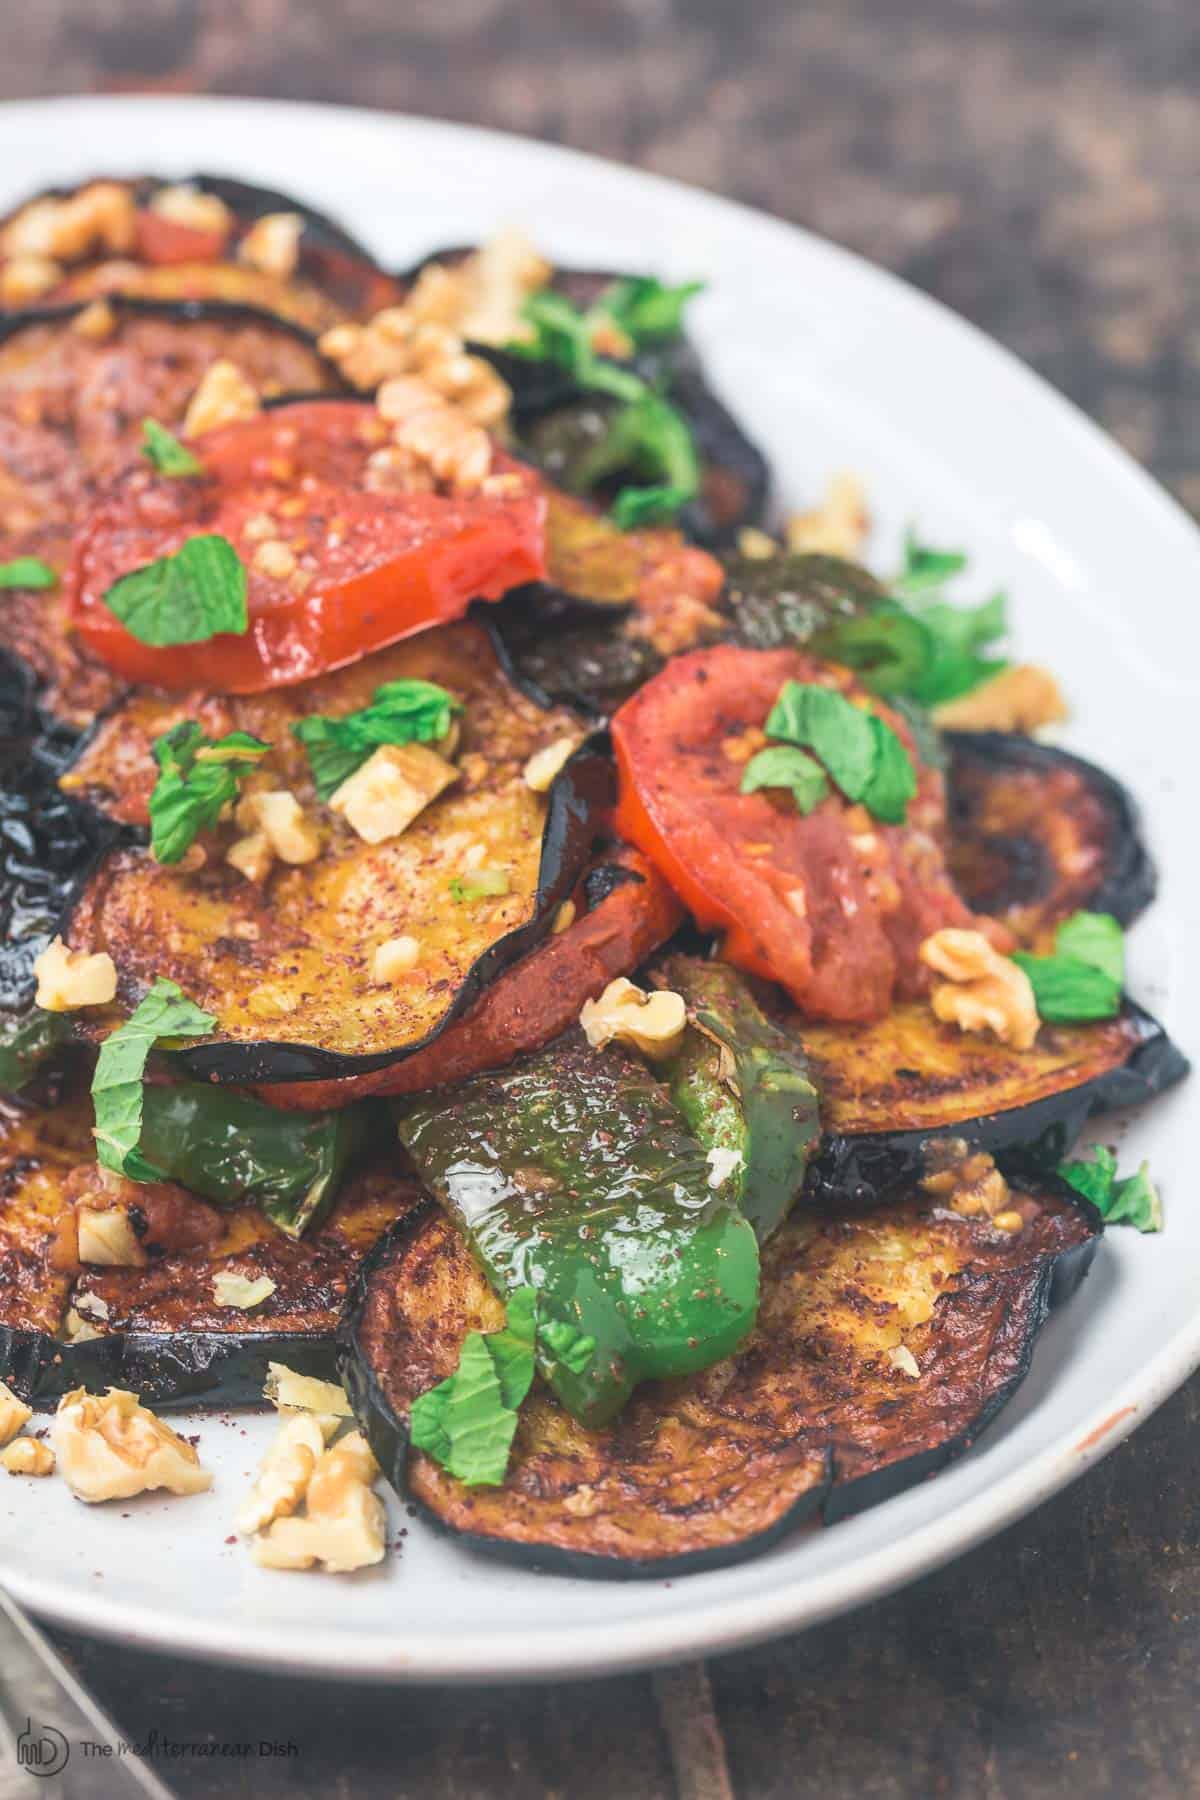 Slices of fried eggplant with mint, tomatoes, green peppers and walnuts